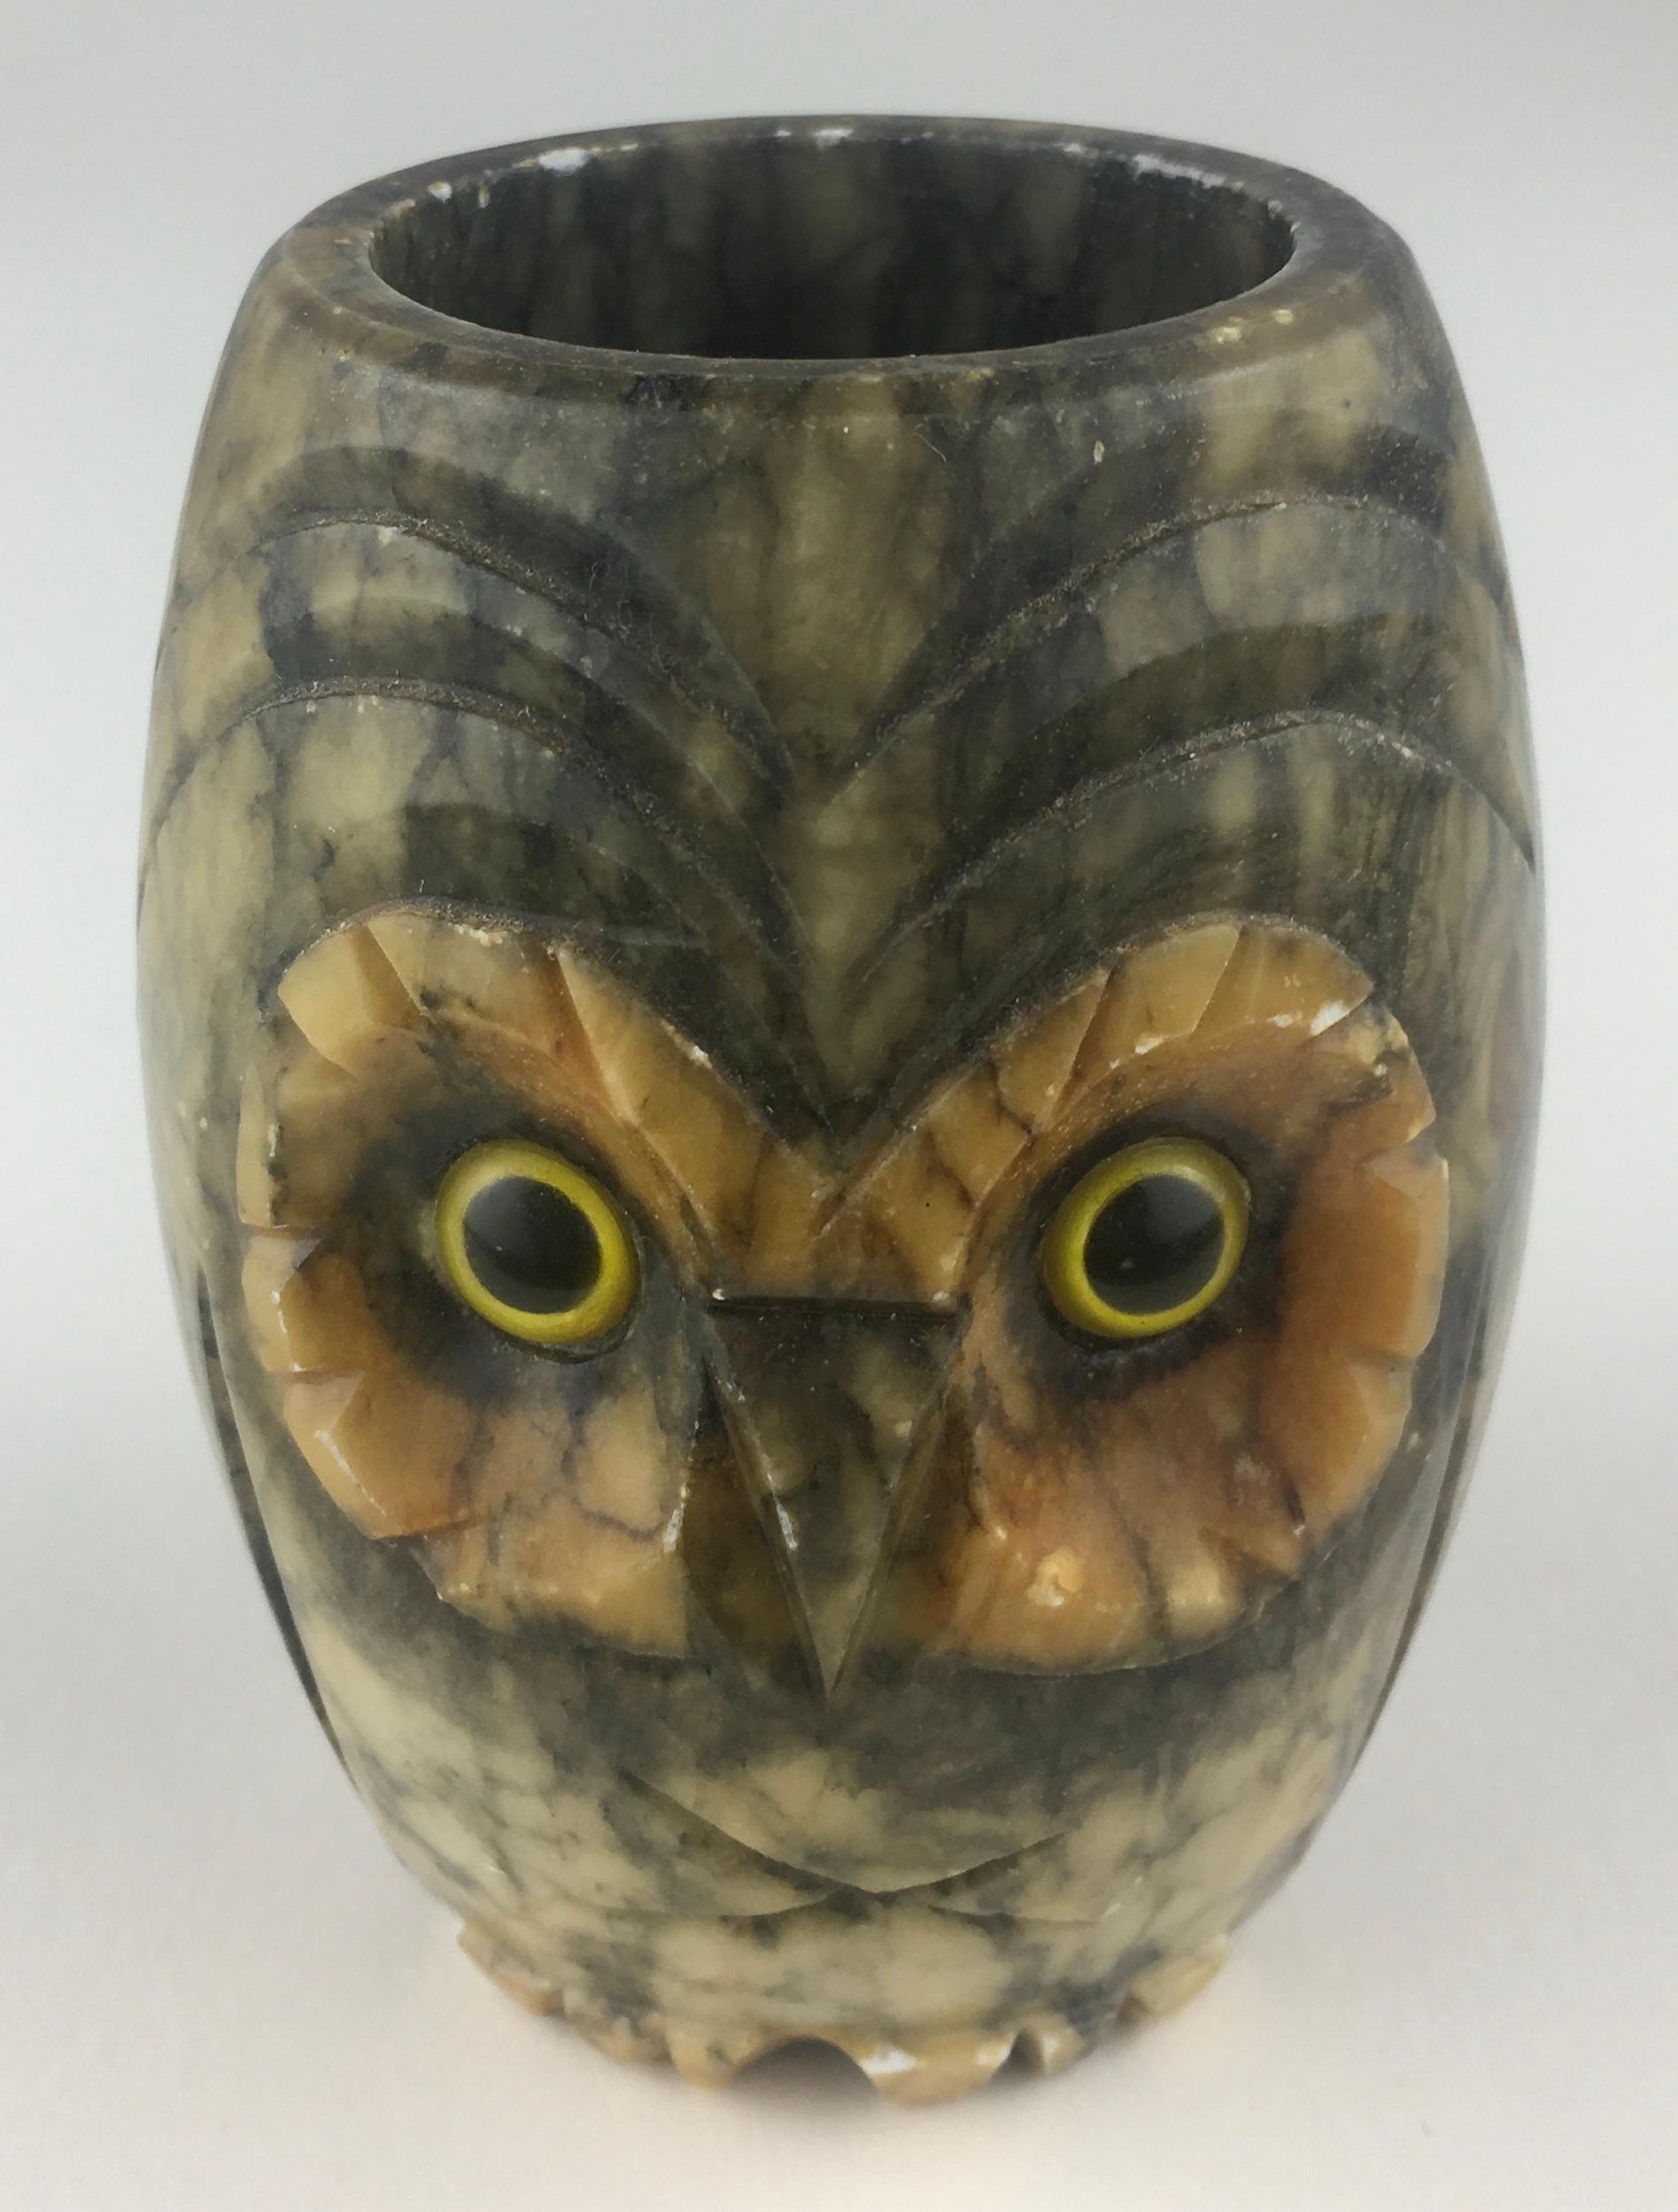 Adorable collection of eight owl sculptures, in a variation of materials: 
2 sculpted from marble, 2 wood, 4 others appear to be ceramic, etc...

The largest marble owl would make an very nice pencil holder in a child's room. 

Various sizes largest